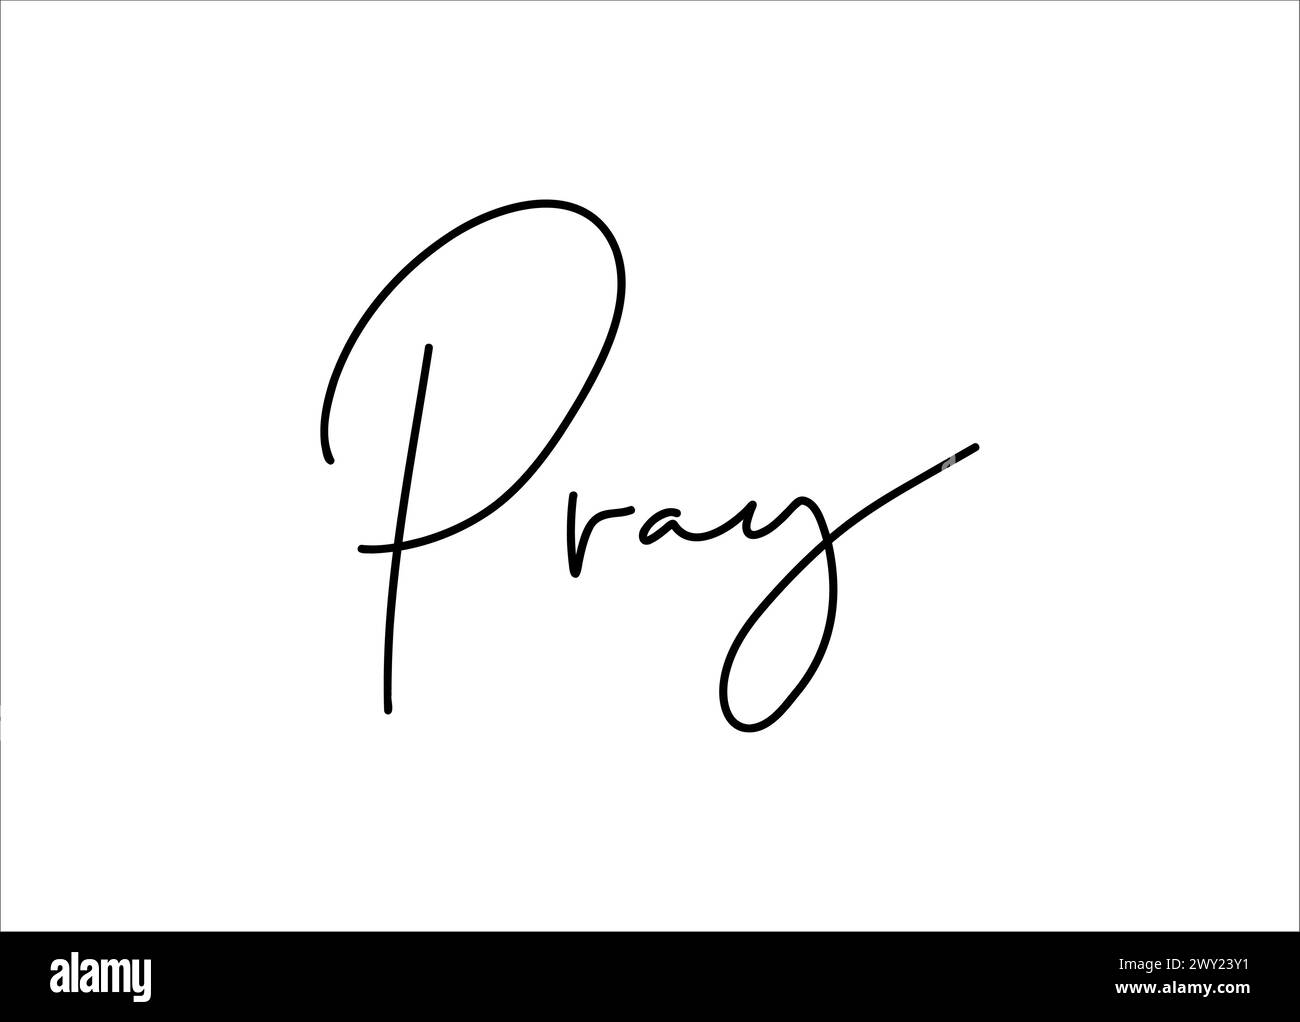 Pray - lettering vector isolated on white background Stock Vector